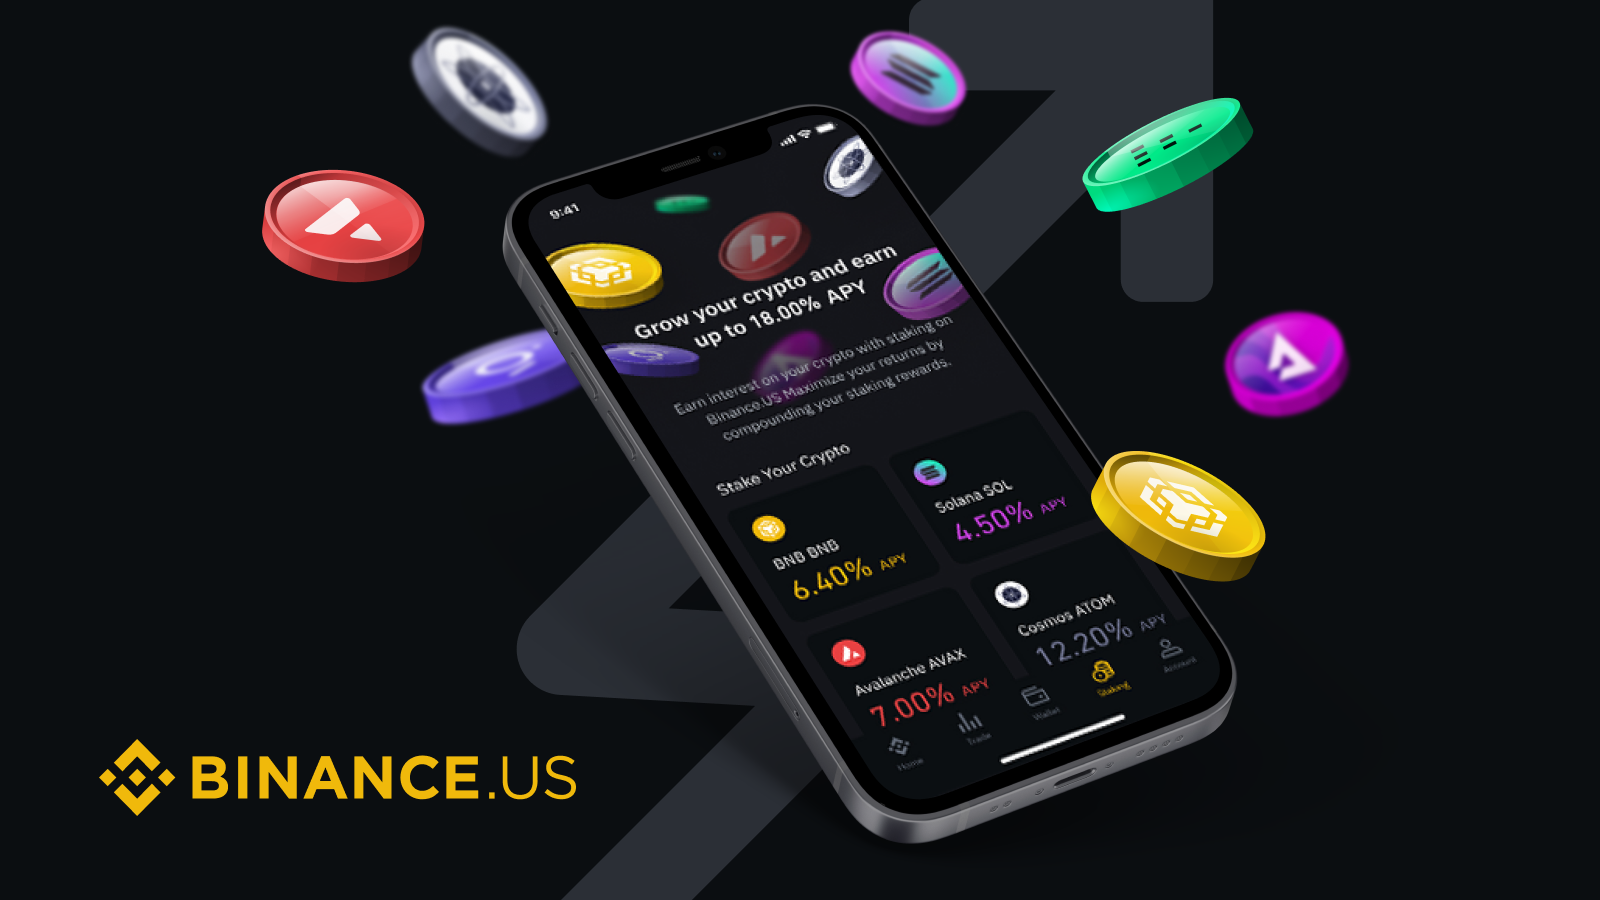 Binance.US Launches New Staking Product, Empowering Customers to Do More With Their Money While Earning up to 18% APY